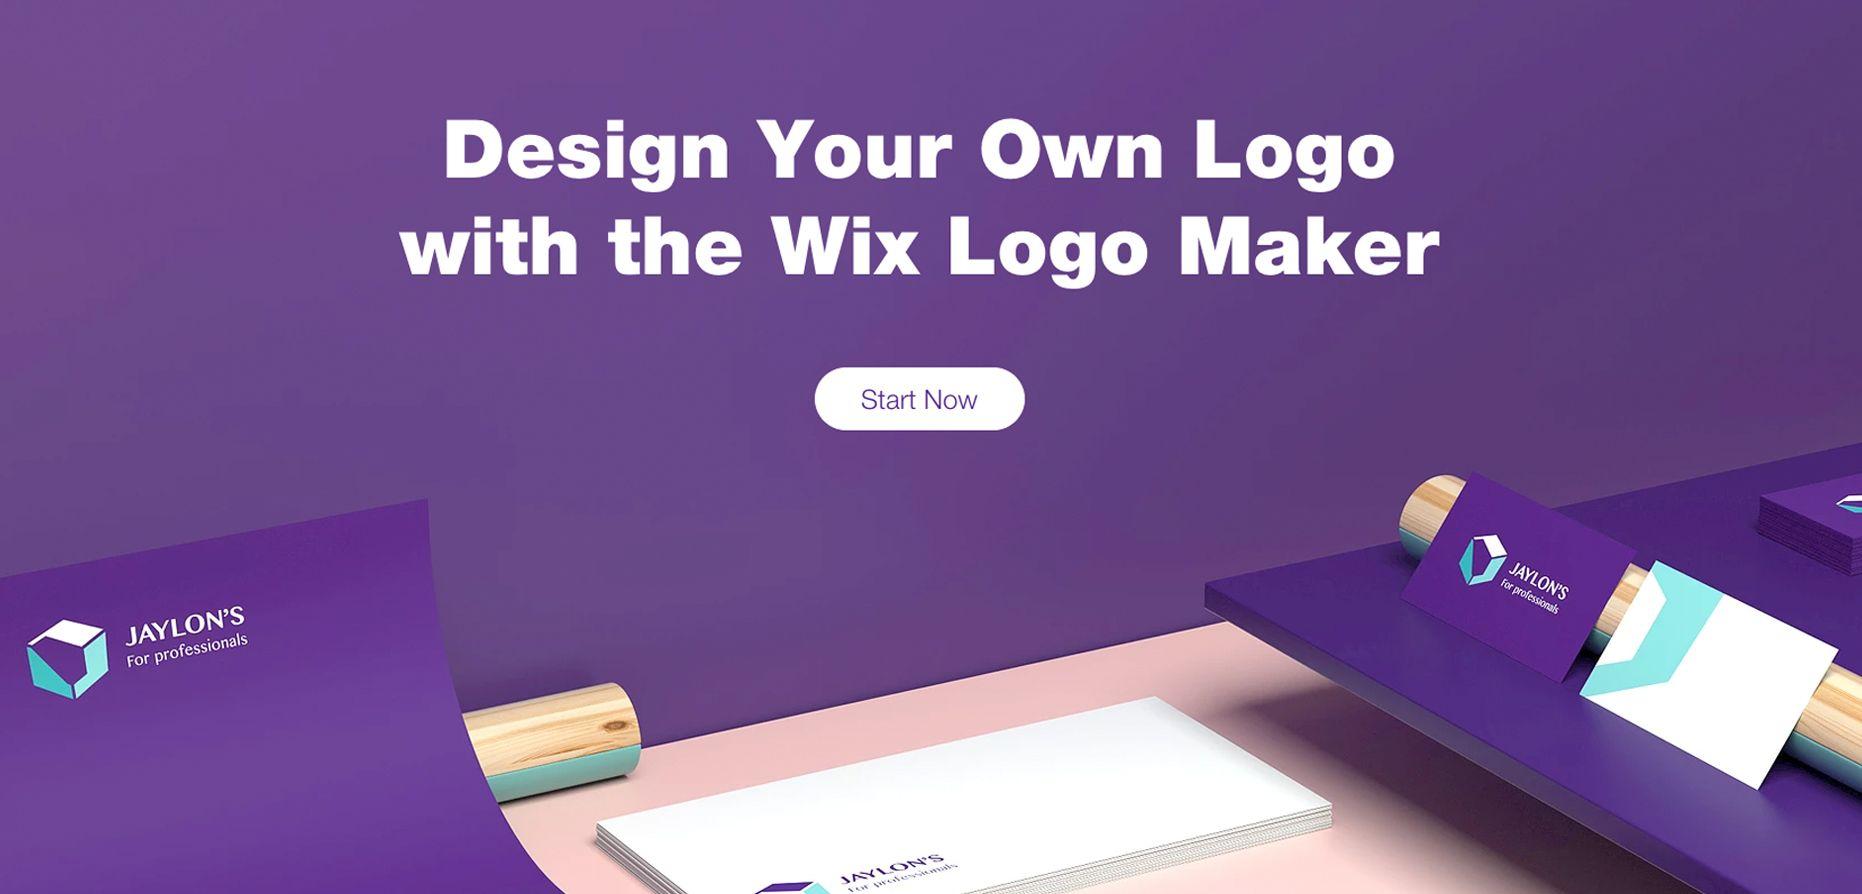 Create Your Own Logo - Logo Maker | Create Your Own Free Logo | Wix.com